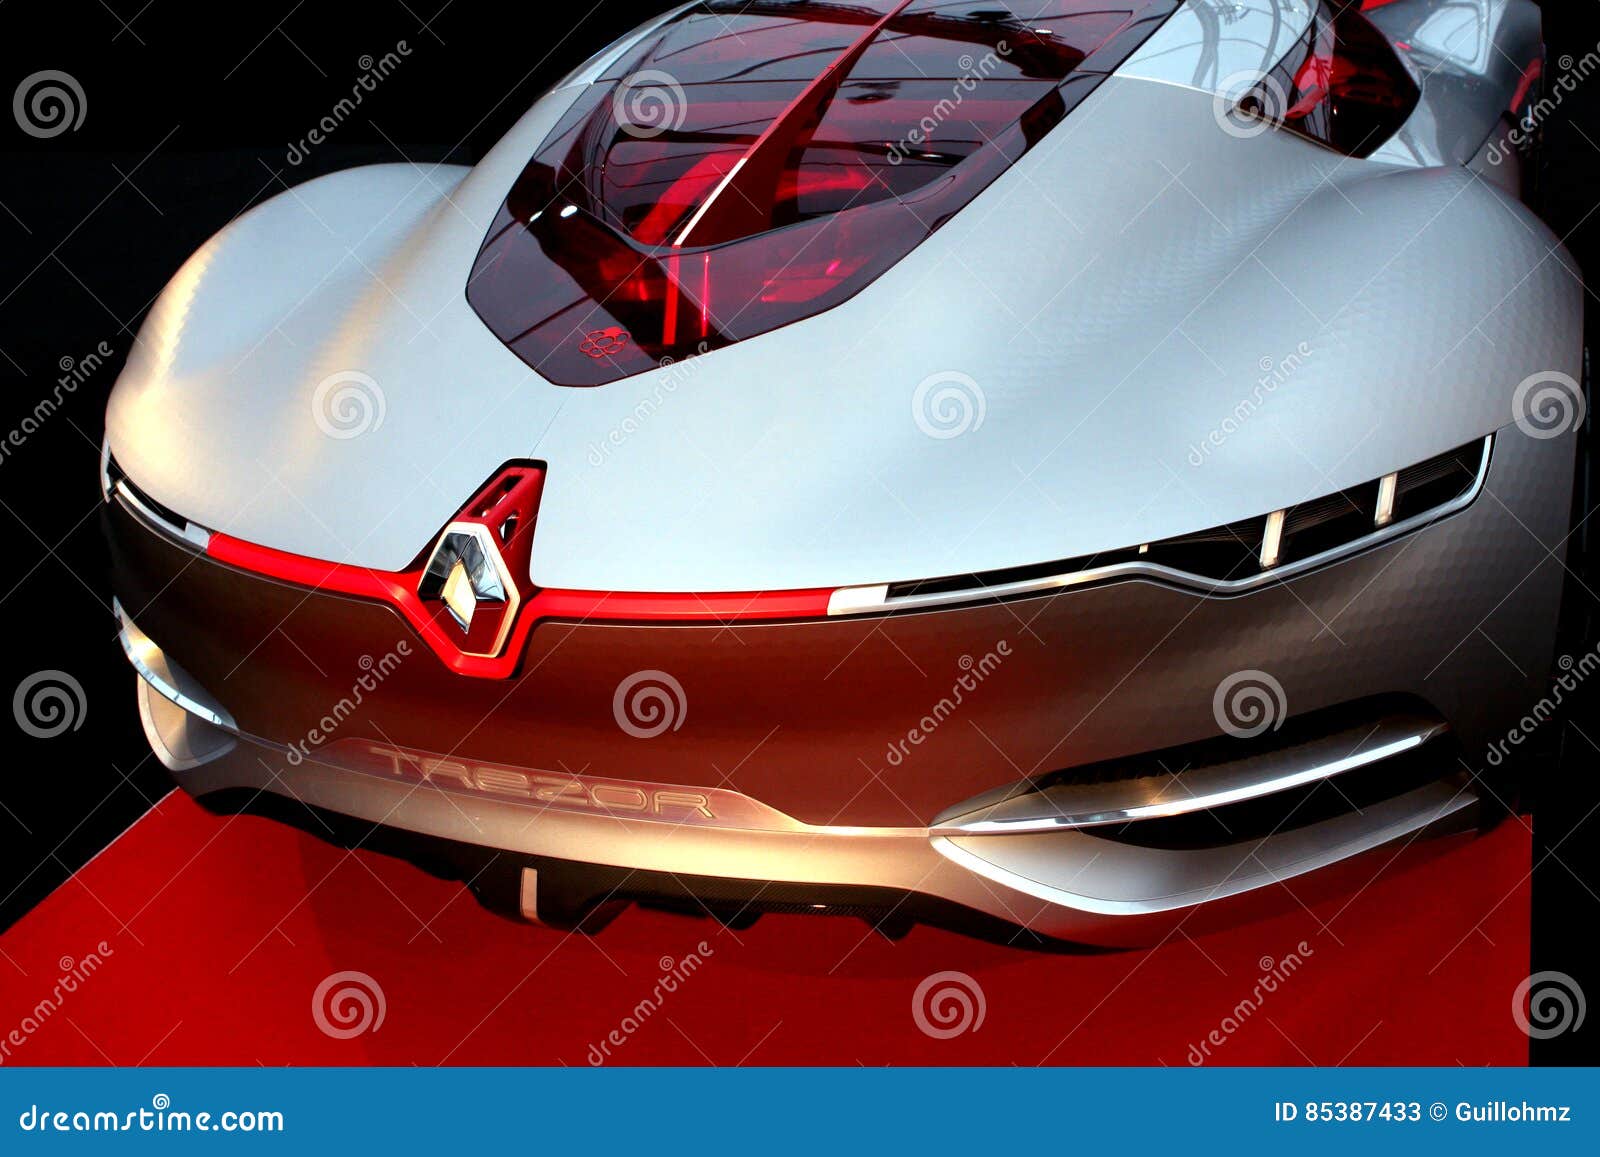 Renault Trezor Concept Race Car Editorial Stock Photo - Image of concept,  exposed: 85387433